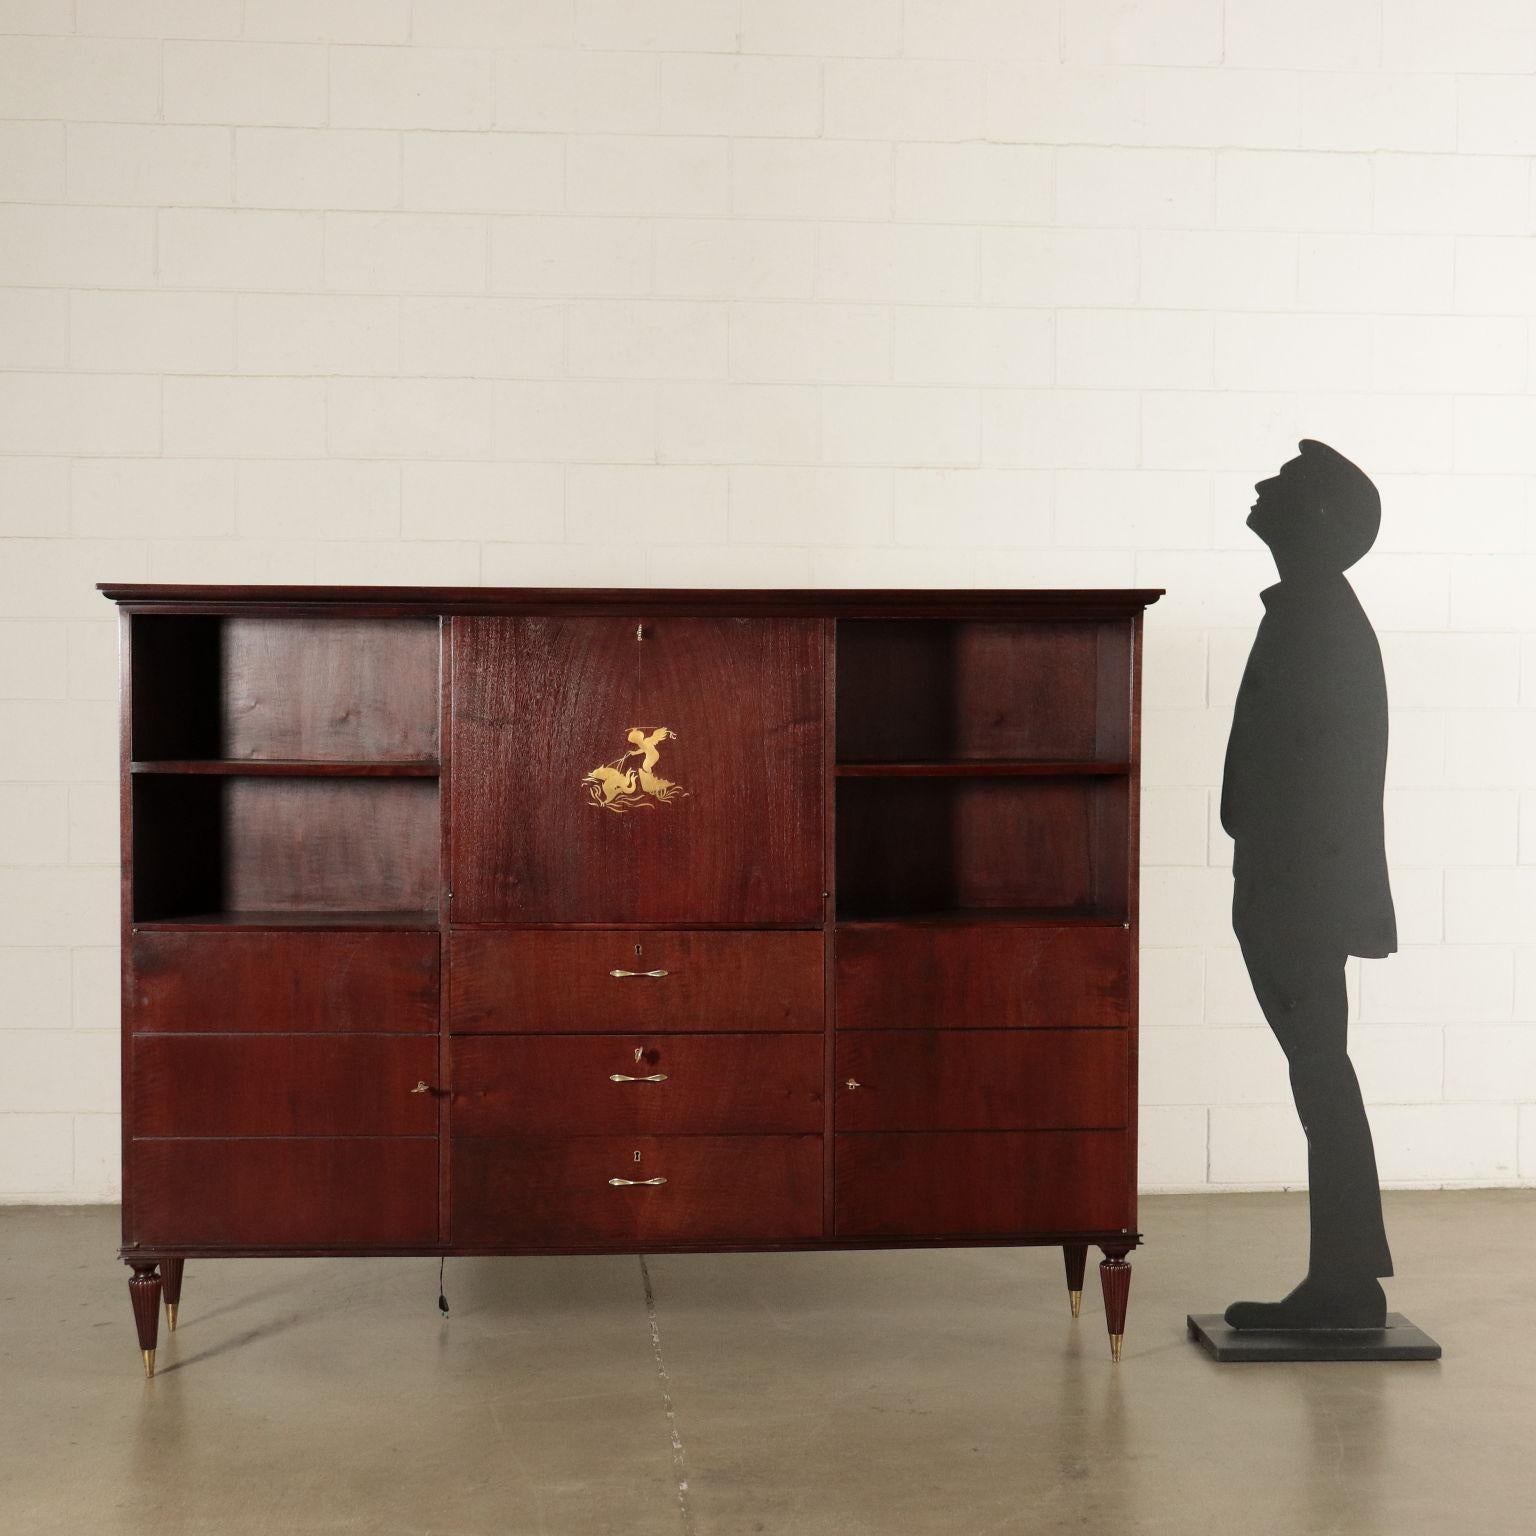 Cabinet with bar space in the middle with a flap door, double swing doors on the sides, stained mahogany veneer, important decorative drawing carved in brass.